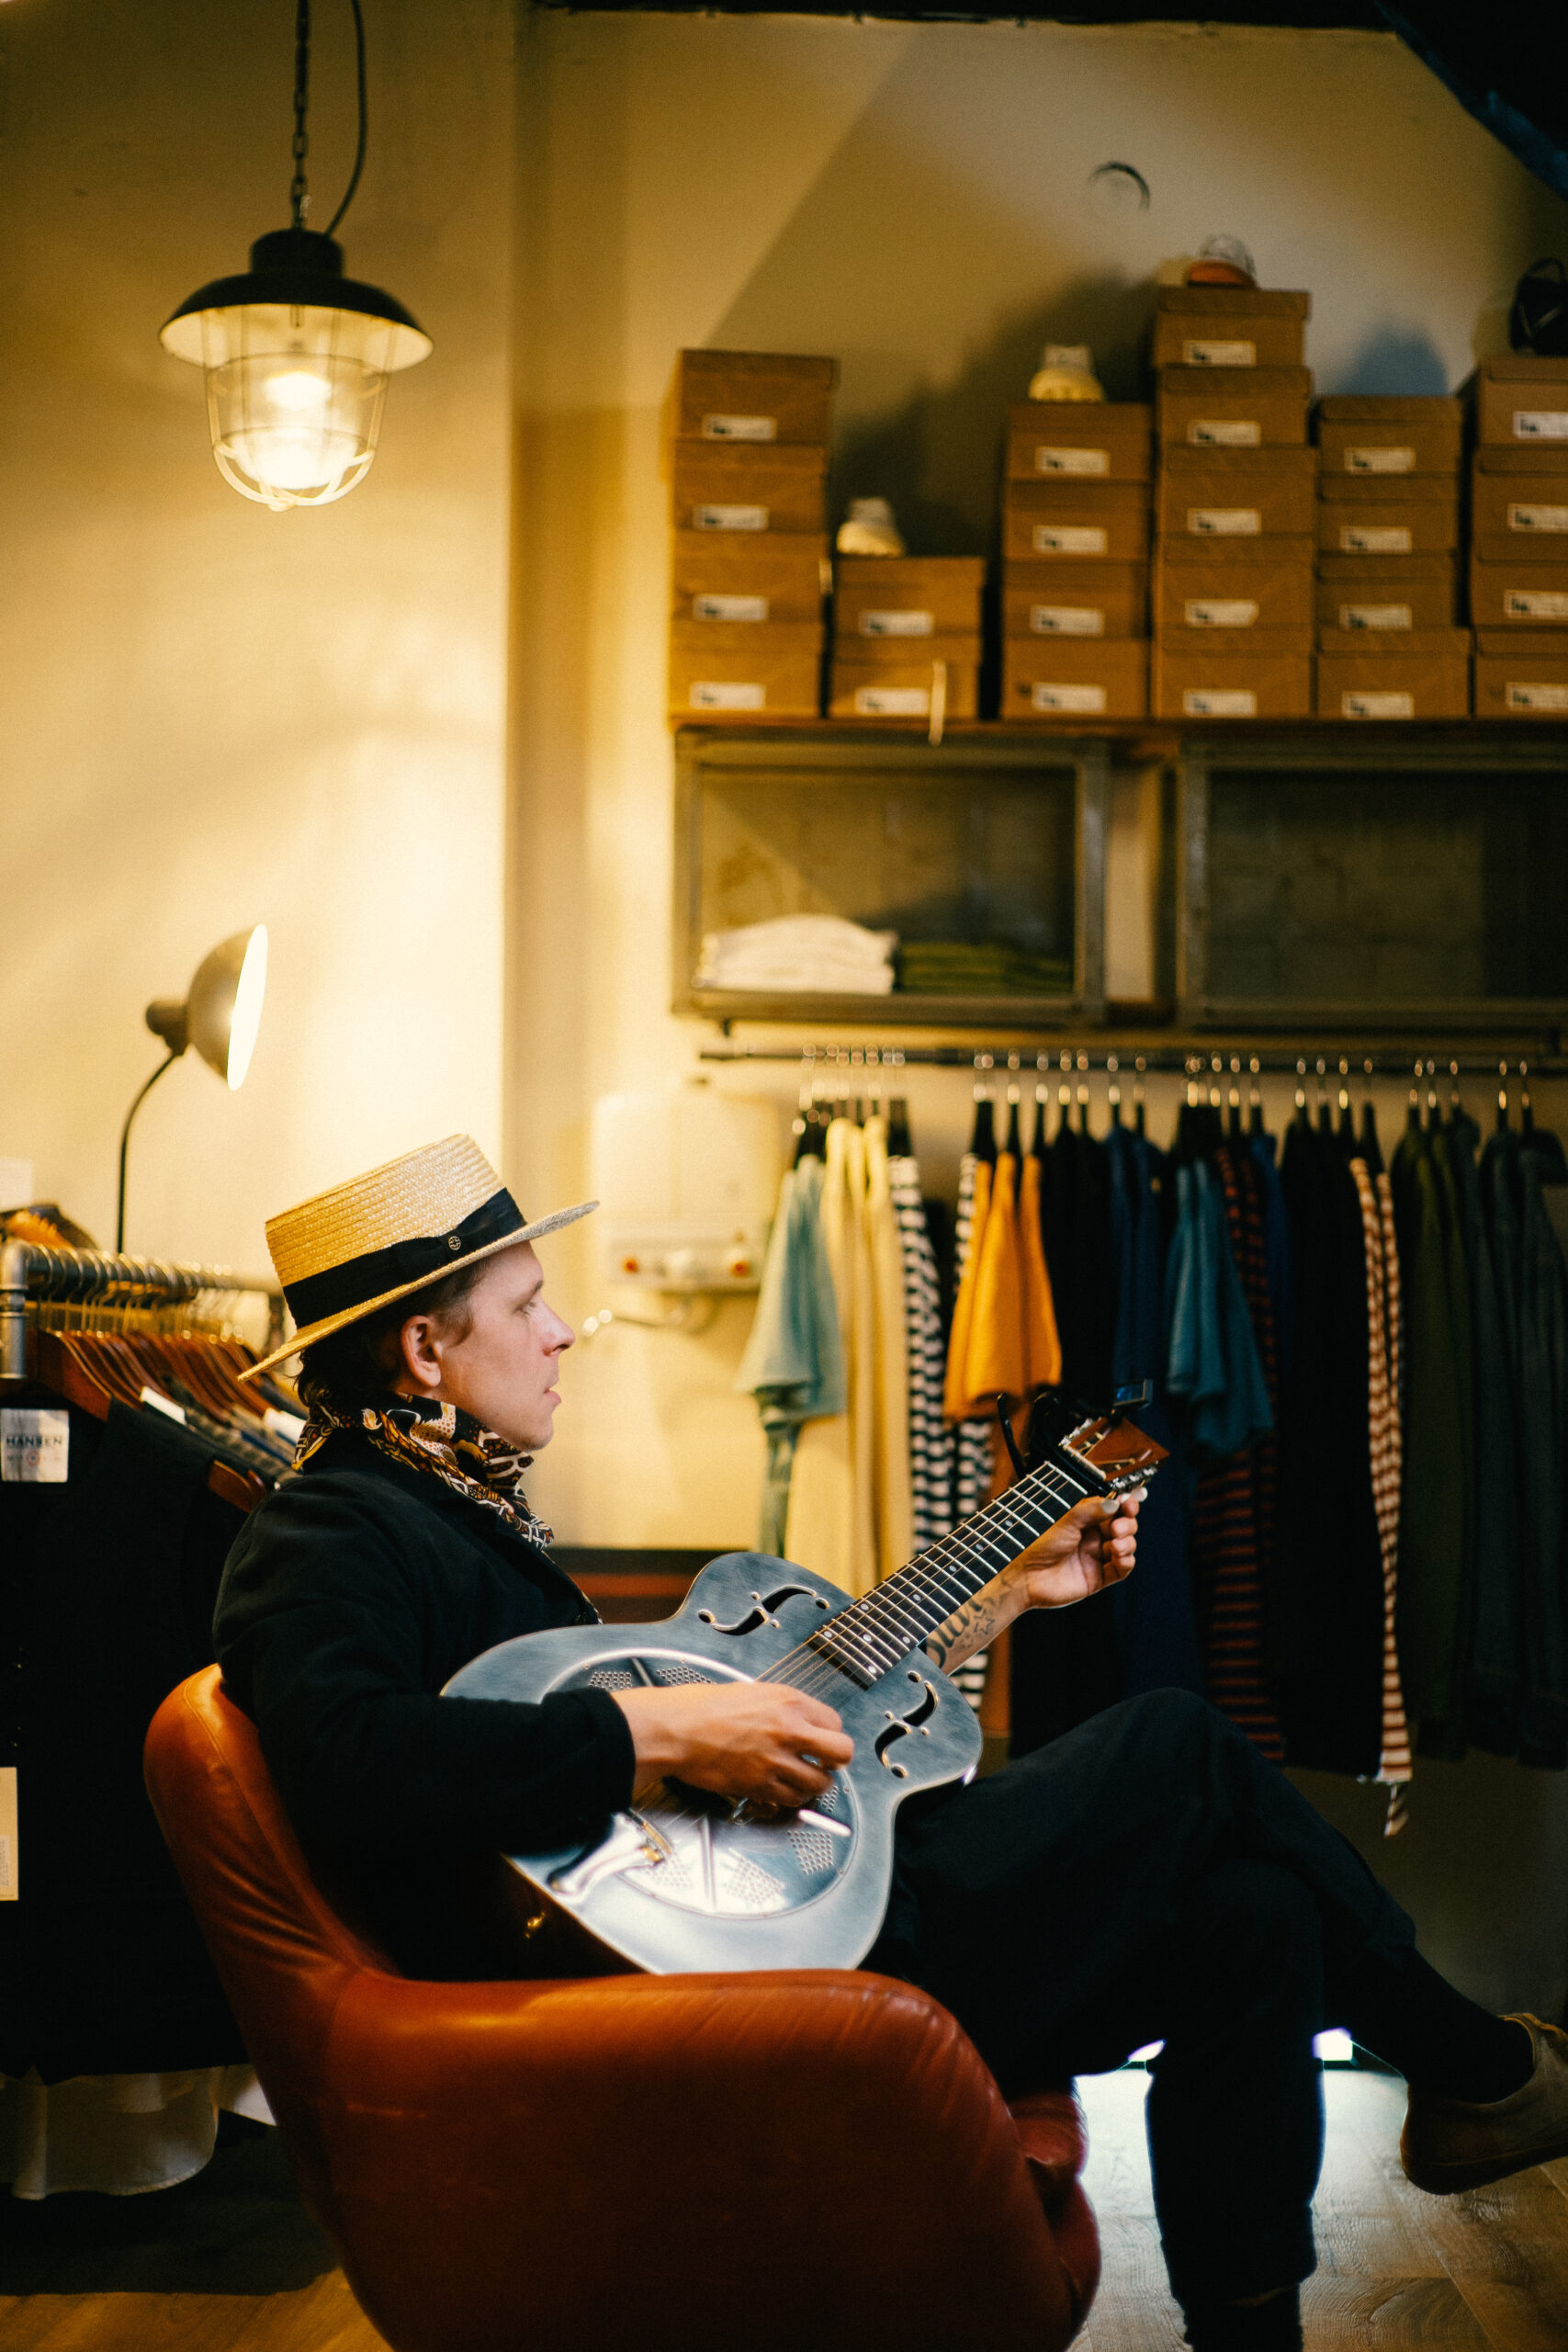 Home of Blues - Quality Garments | Herrenmode in Karlsruhe-Durlach